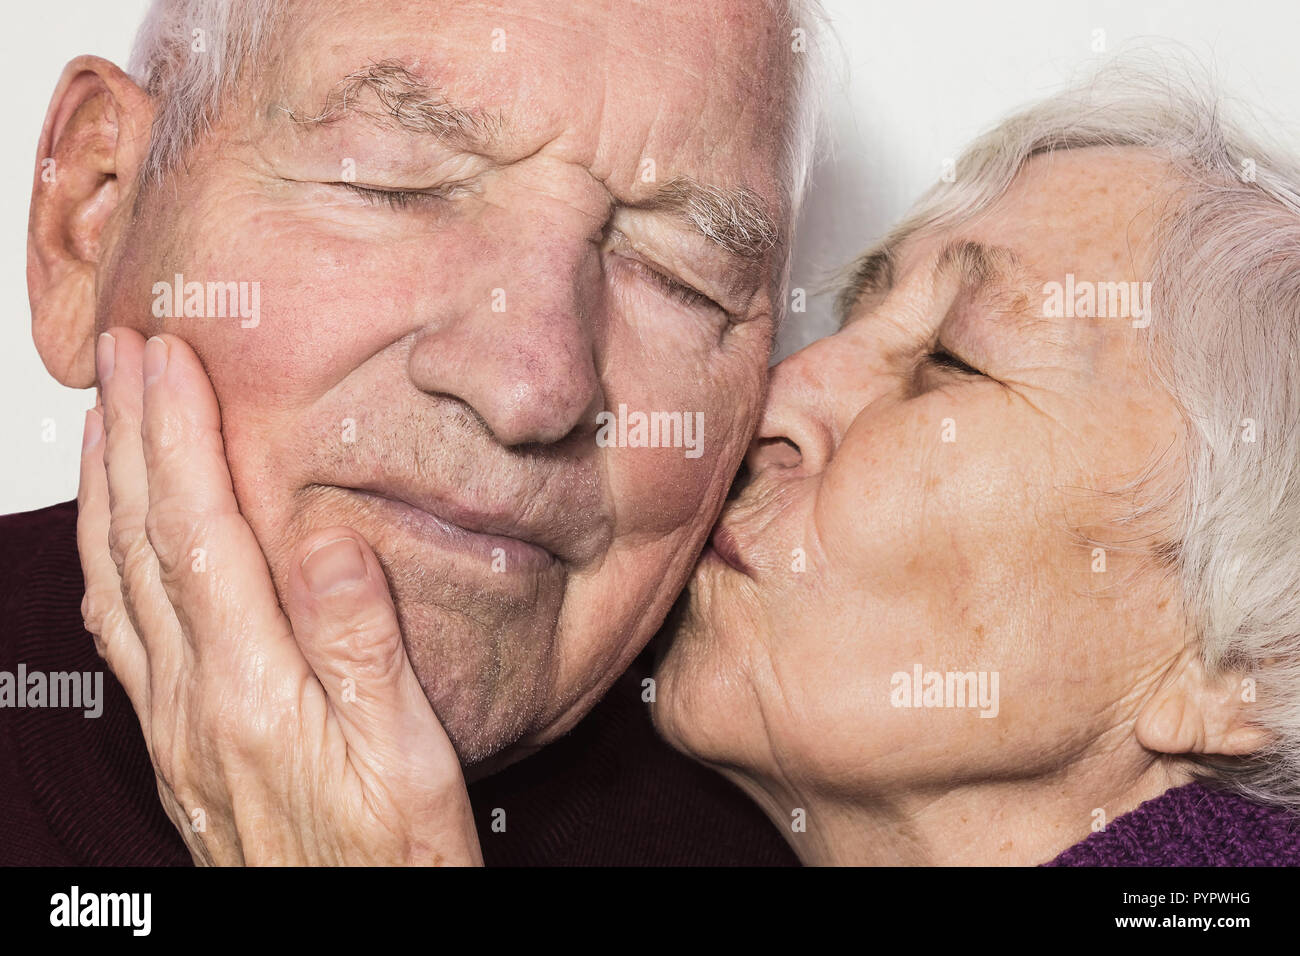 Kissing old men Watch What